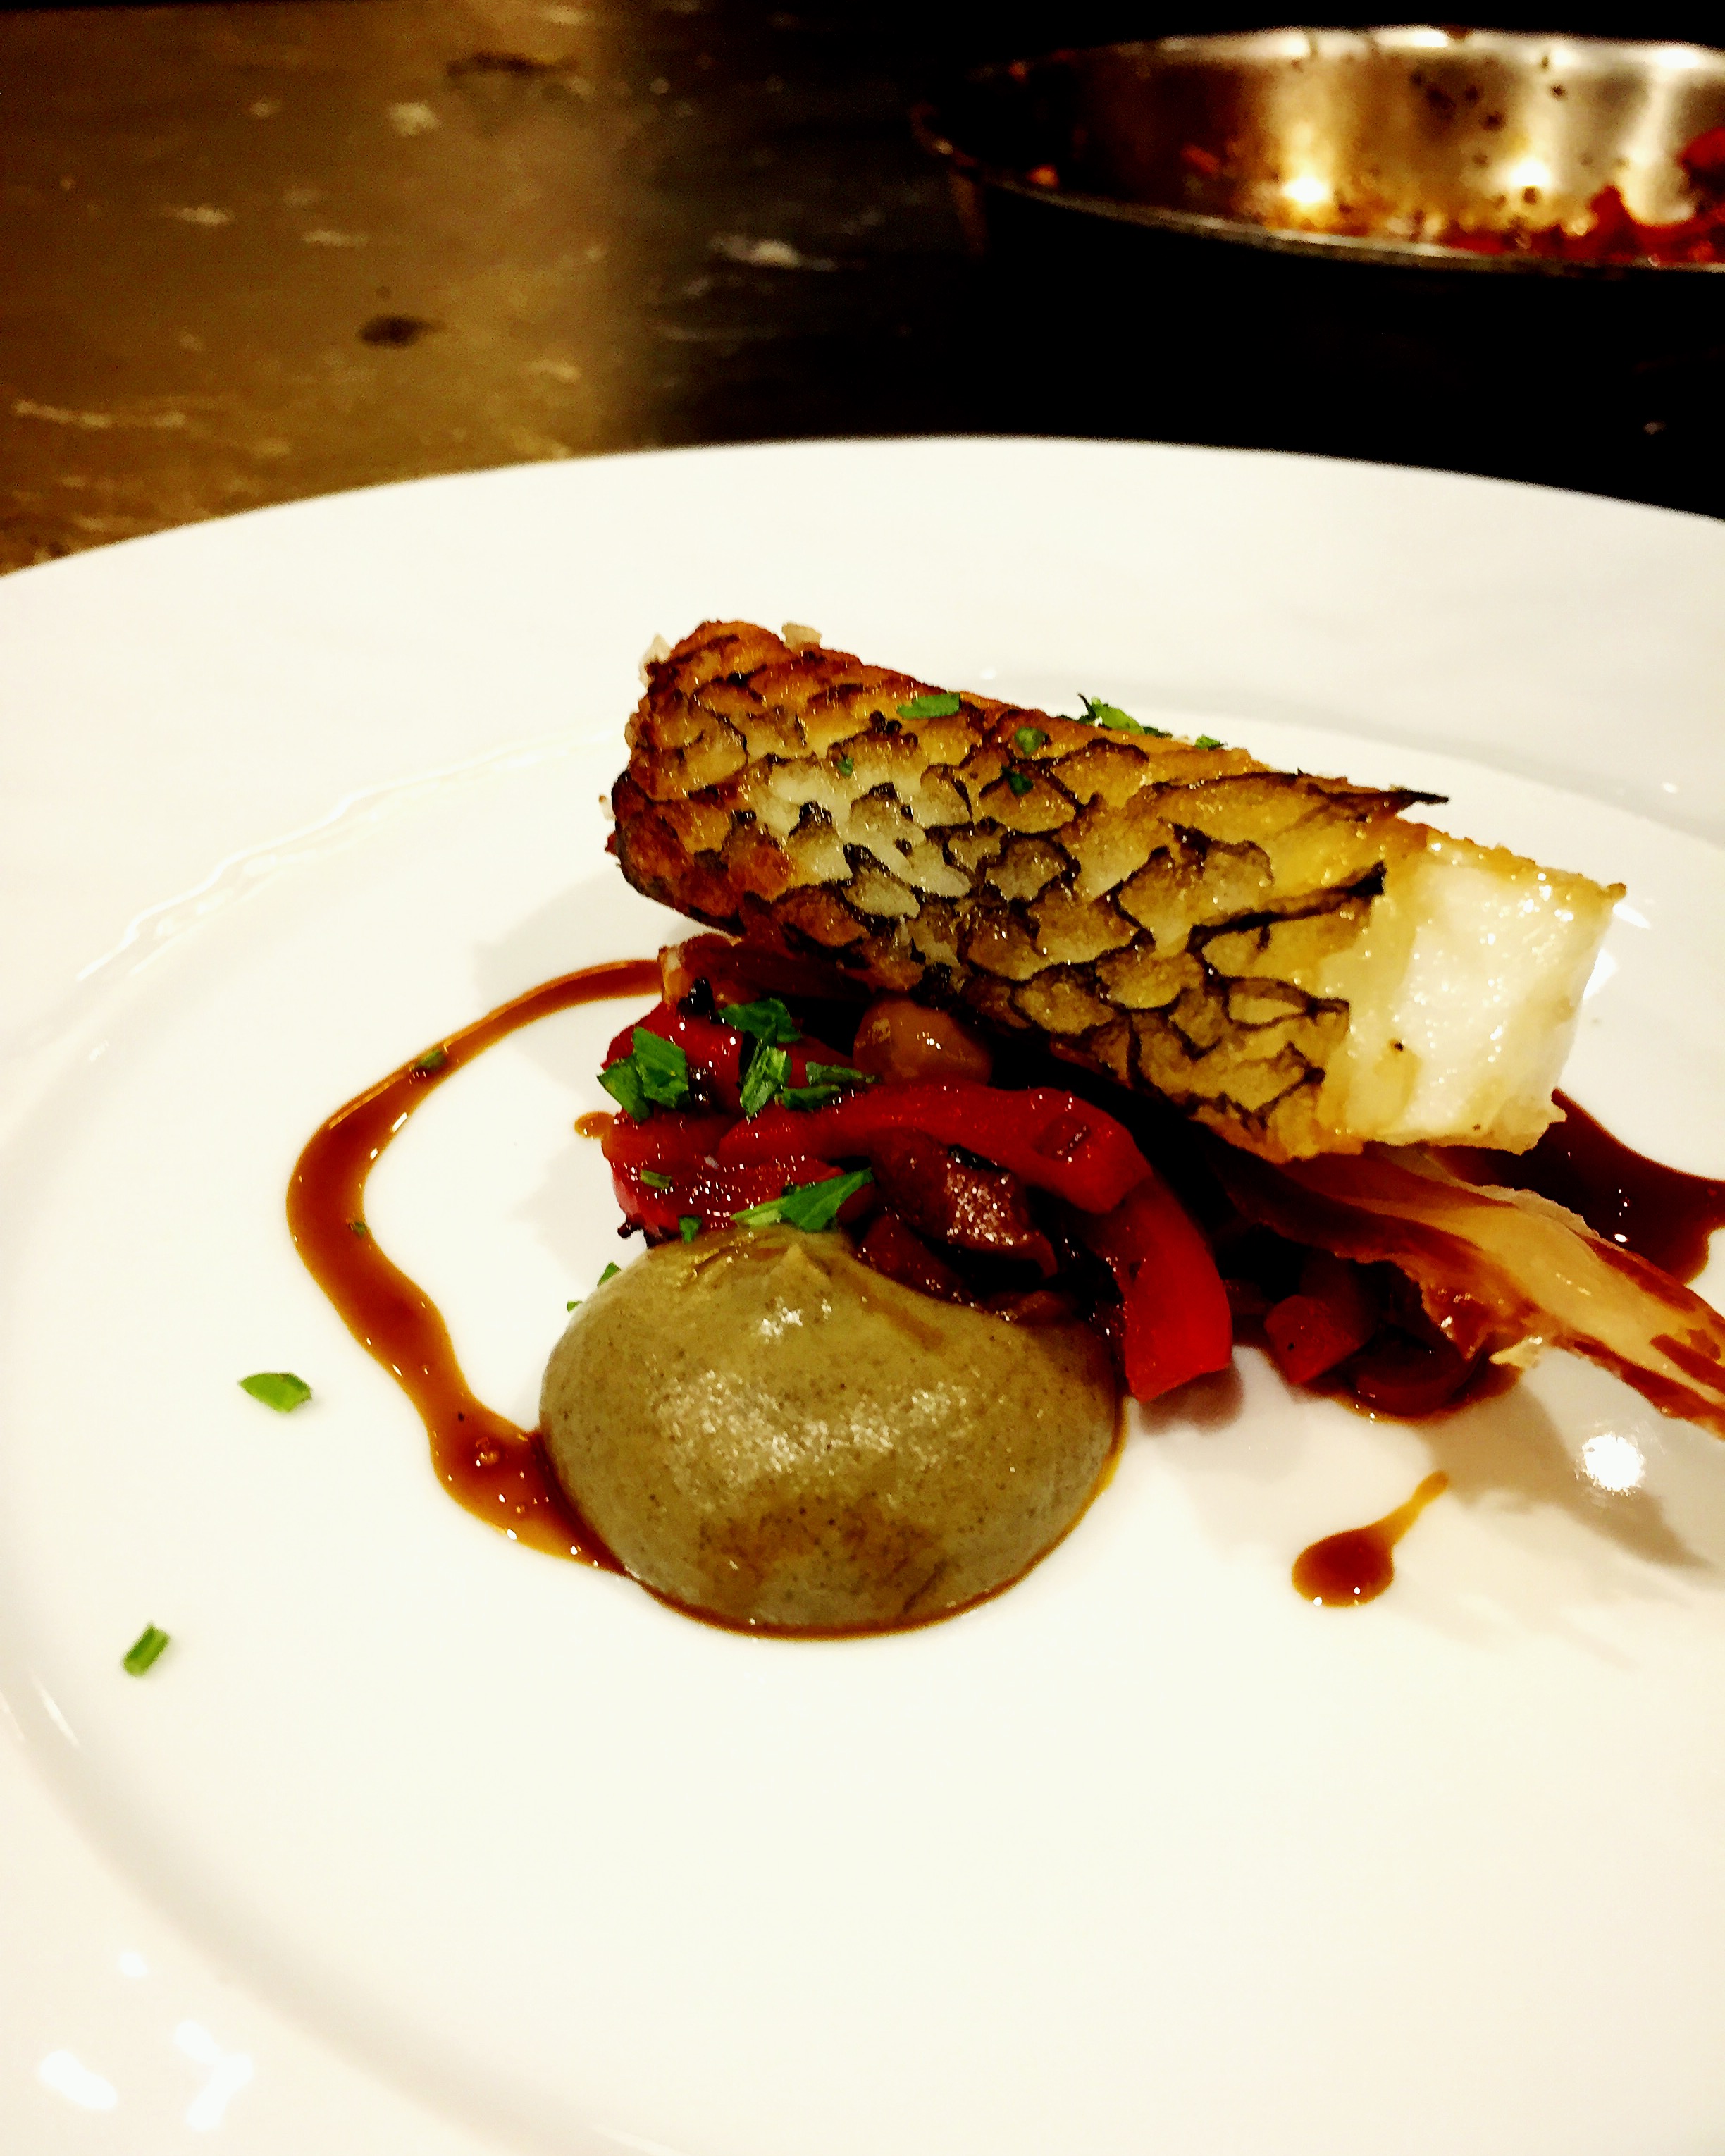 Roasted toothfish, eggplant, peppers and olives